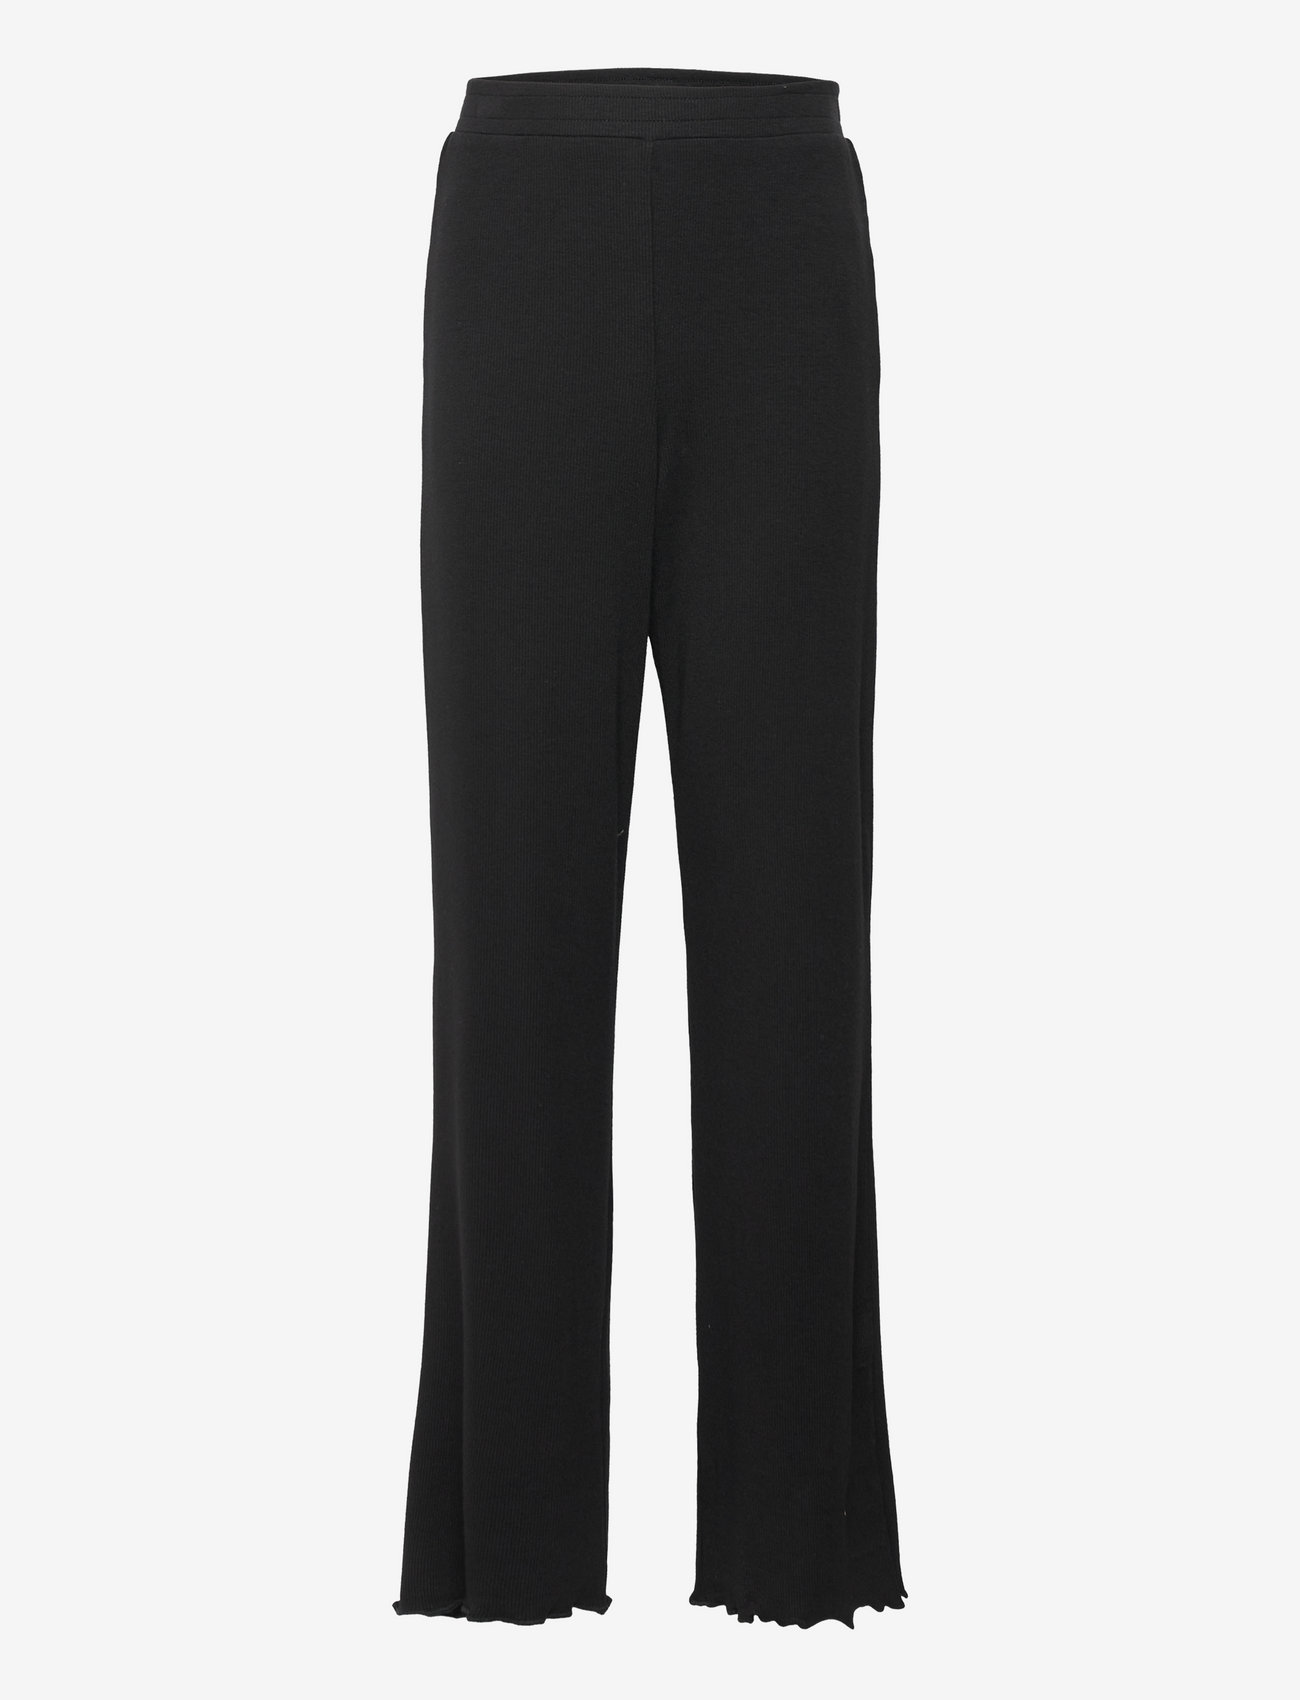 Sofie Schnoor Young - Trousers - laveste priser - black - 0